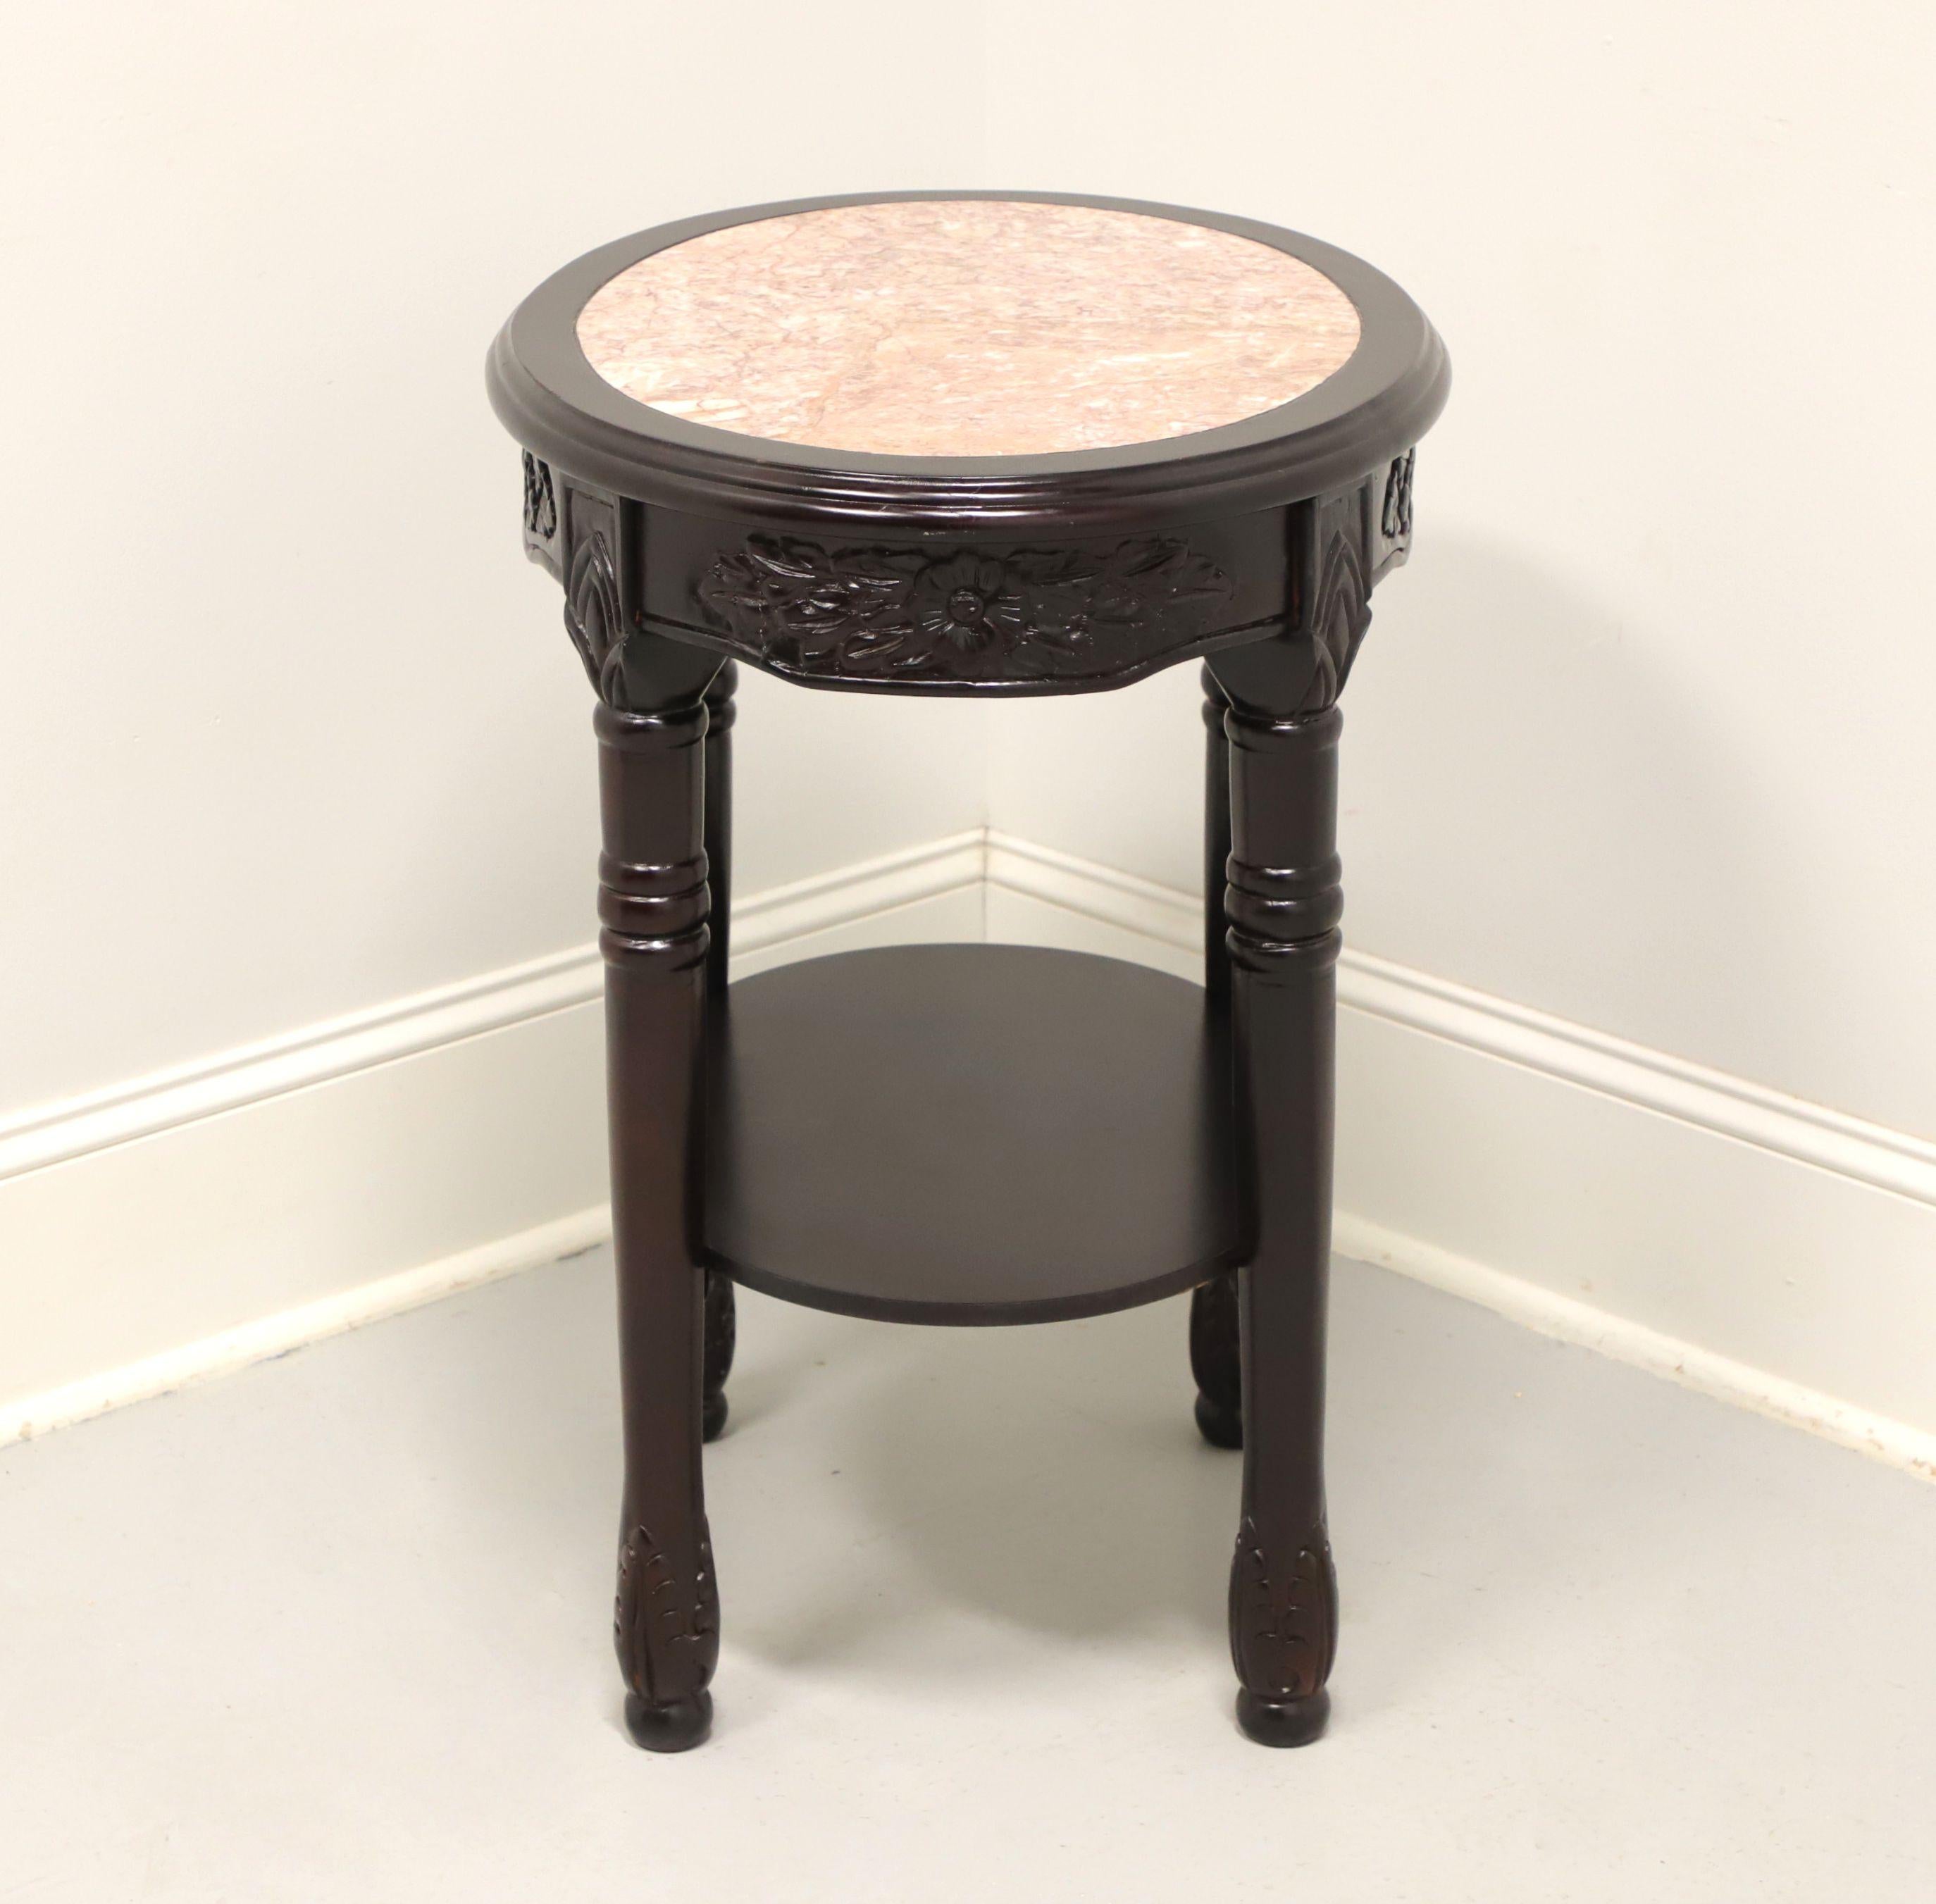 Antique Rosewood Finish Victorian Oval Marble Top Occasional Table - A In Good Condition For Sale In Charlotte, NC